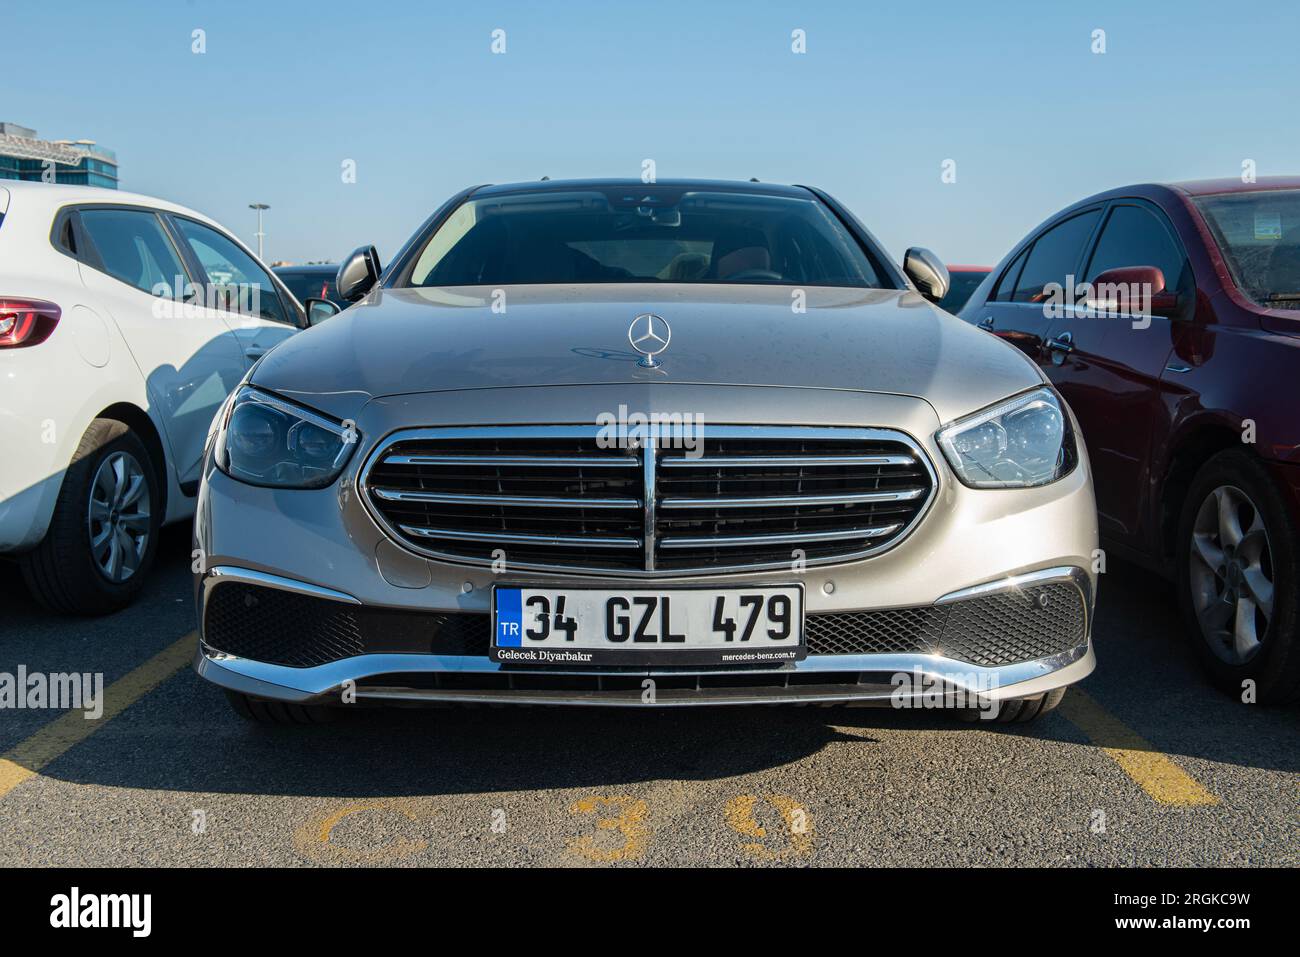 ISTANBUL TURKEY - AUGUST 2, 2023: Mercedes-Benz E-Class is a range of executive cars manufactured by German automaker Mercedes-Benz in various engine Stock Photo